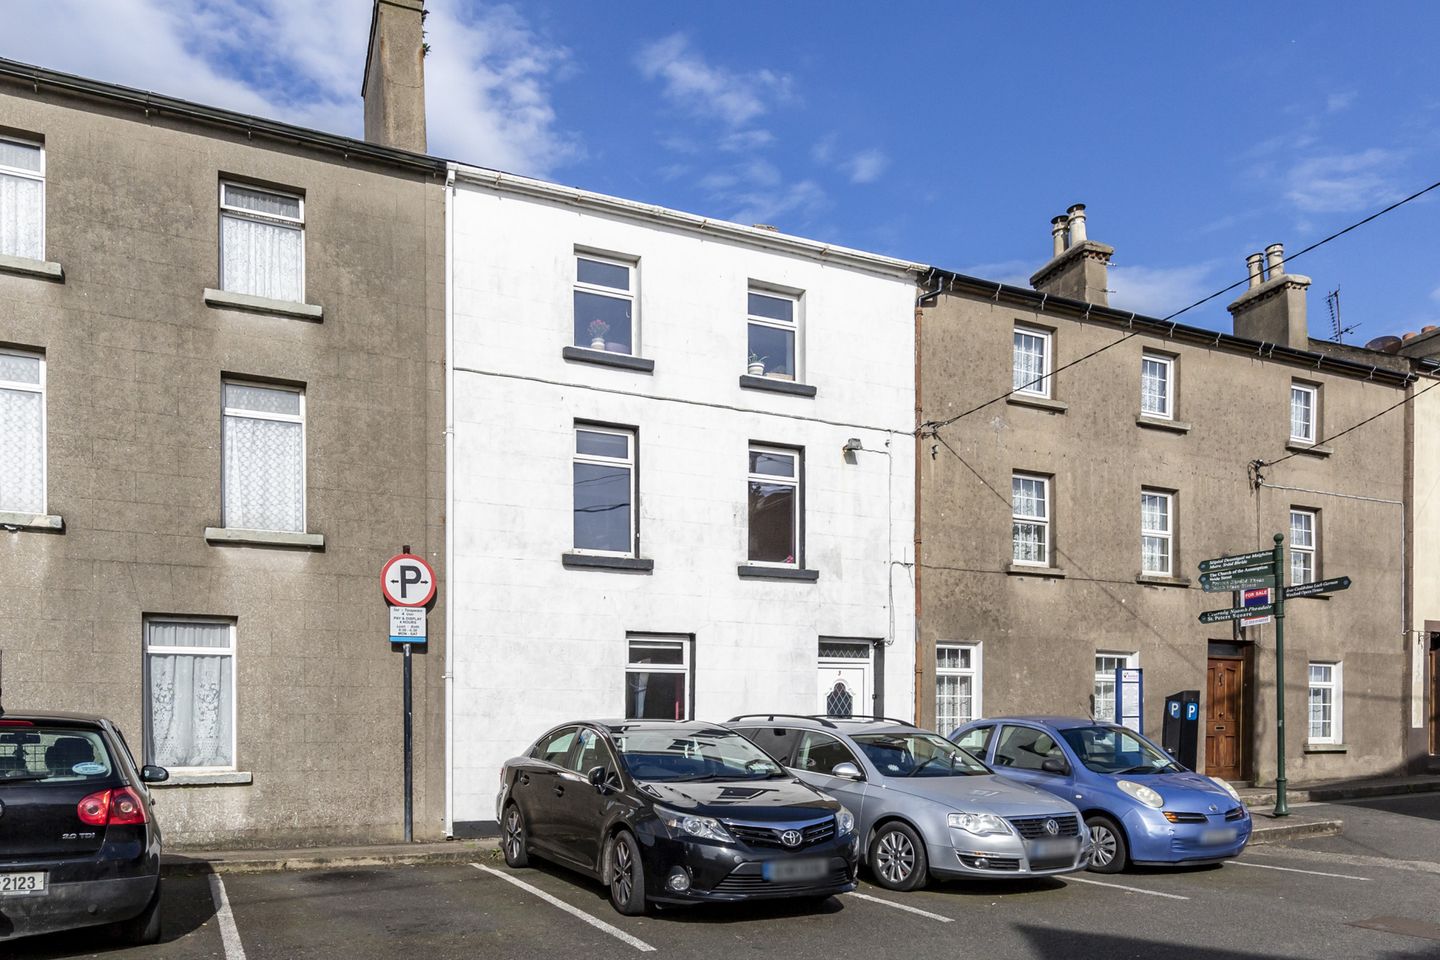 3 Patrick's Square, Wexford Town, Co. Wexford